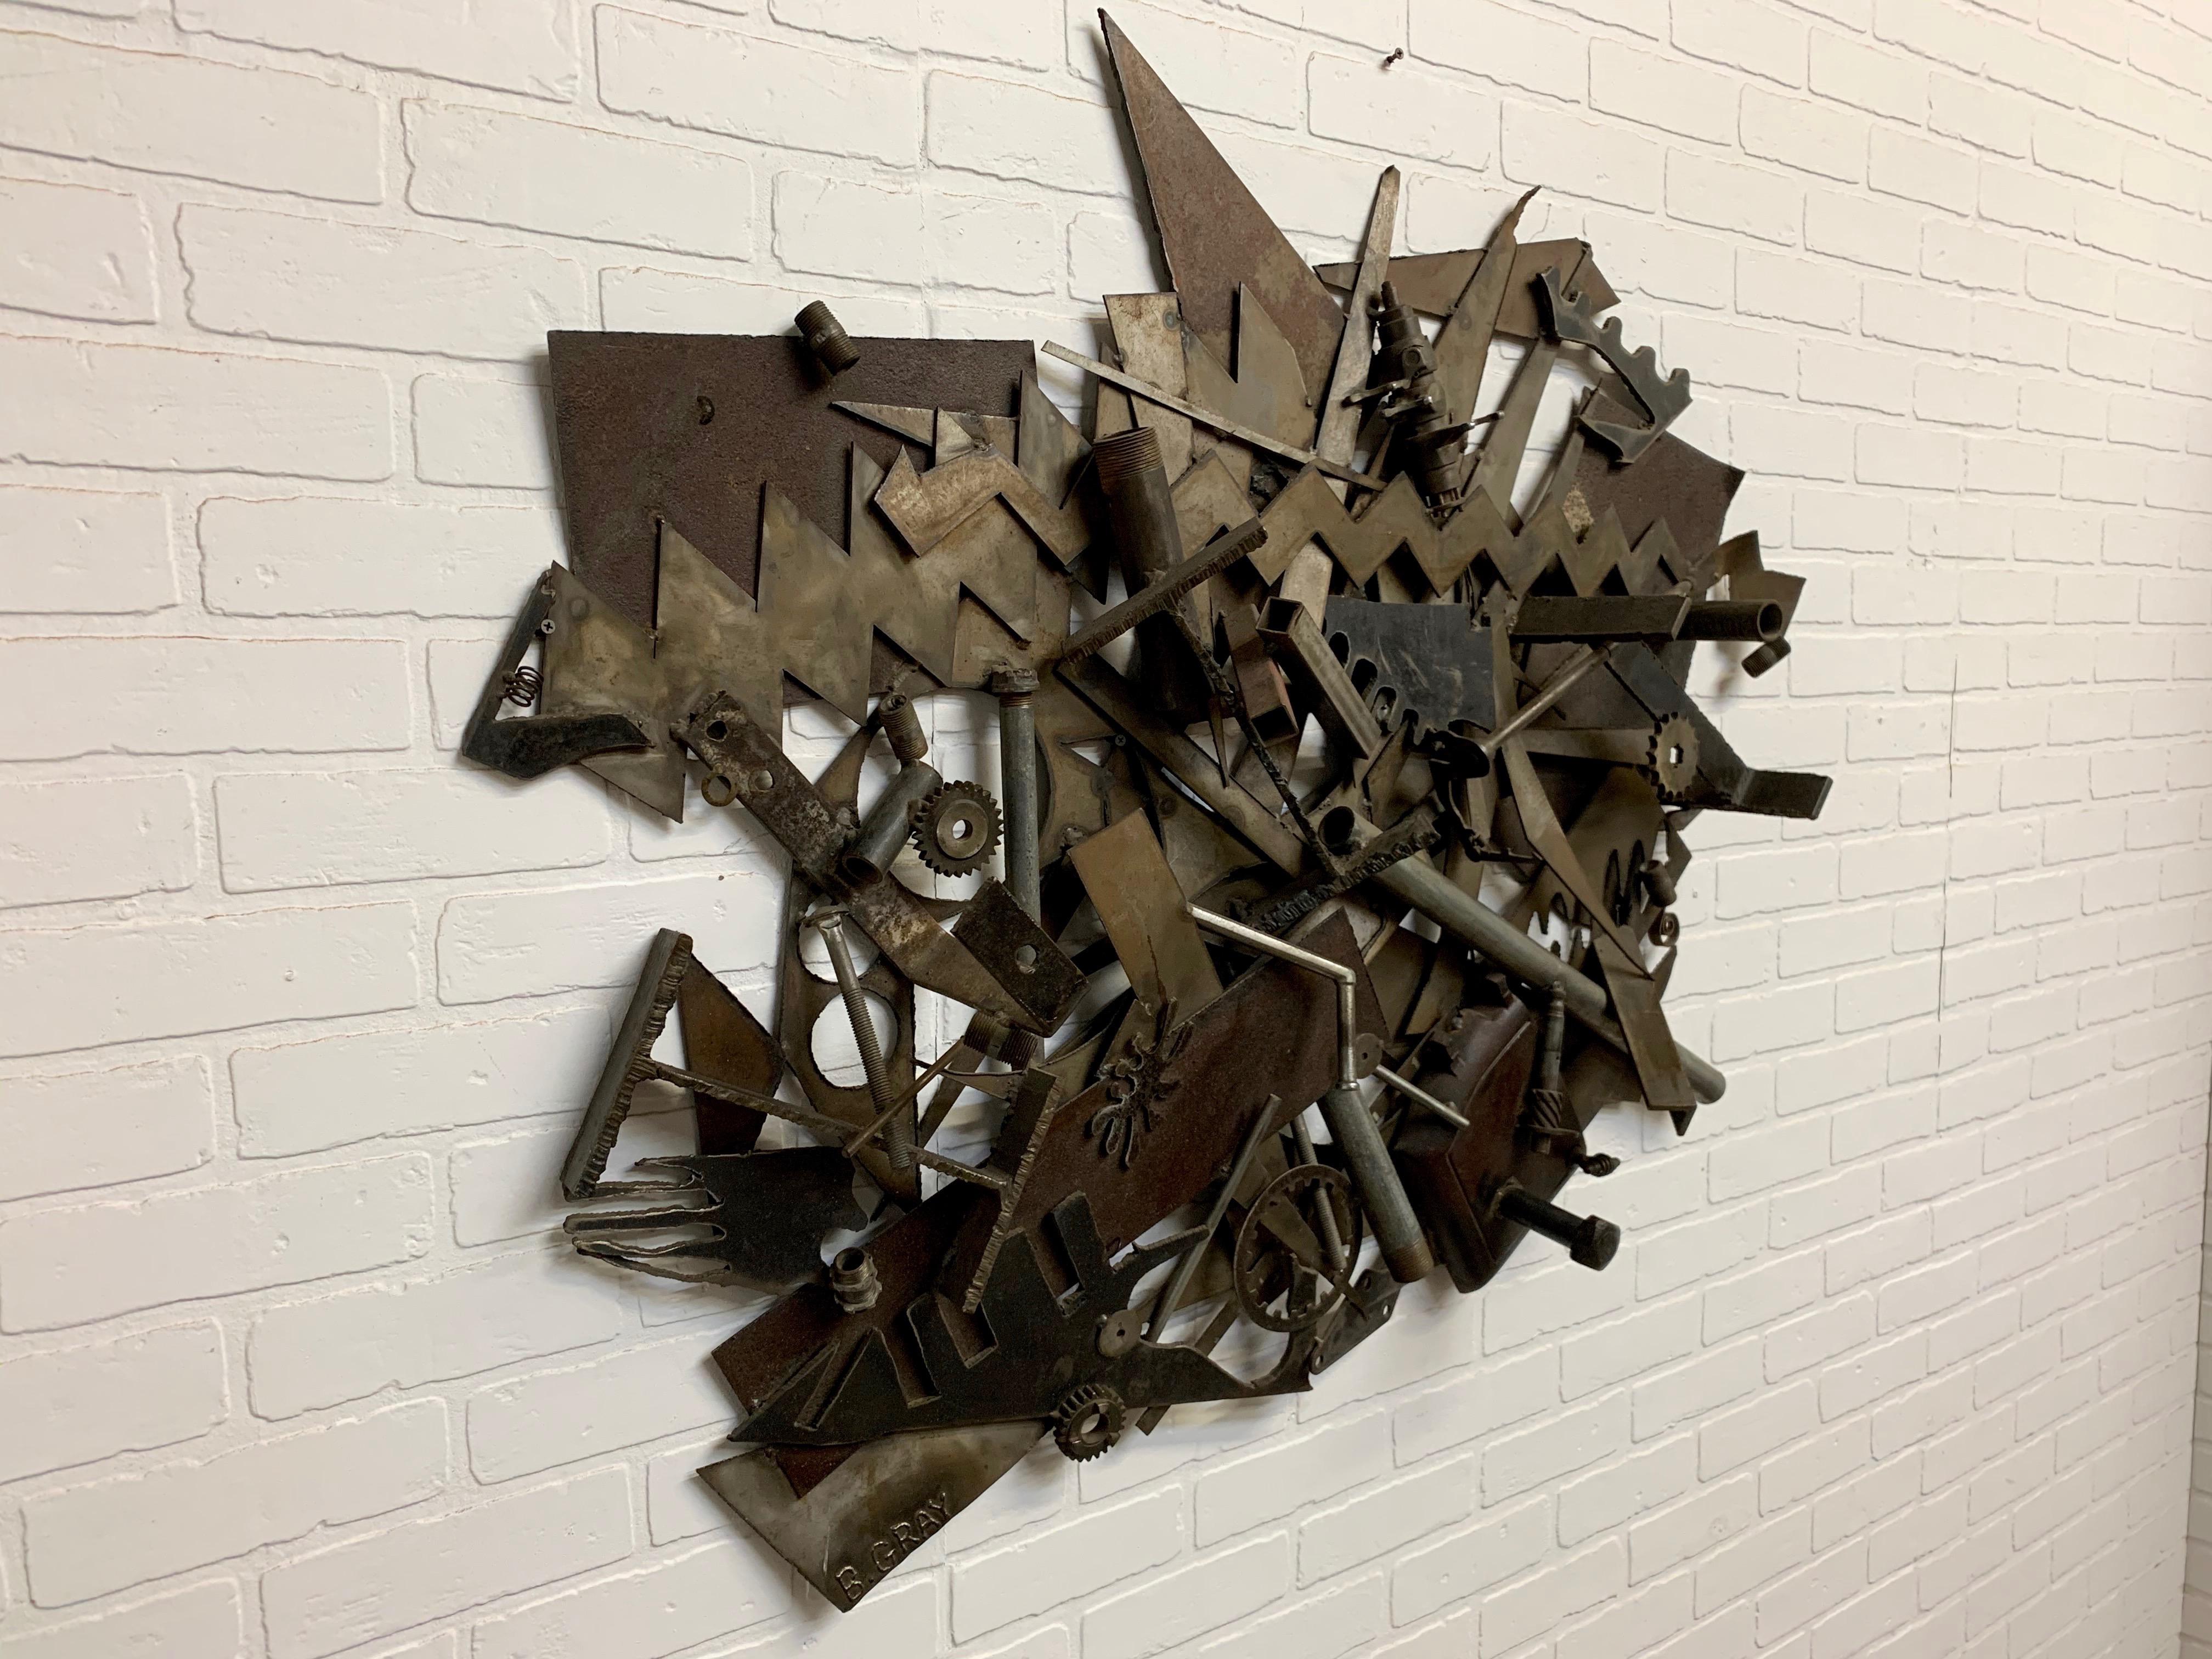 A mixture of nuts and bolts and scrap metal with gears welded together to make this Brutalist sculpture a real show stopper 
Bruce Gray known for his art in many museums and private collections.